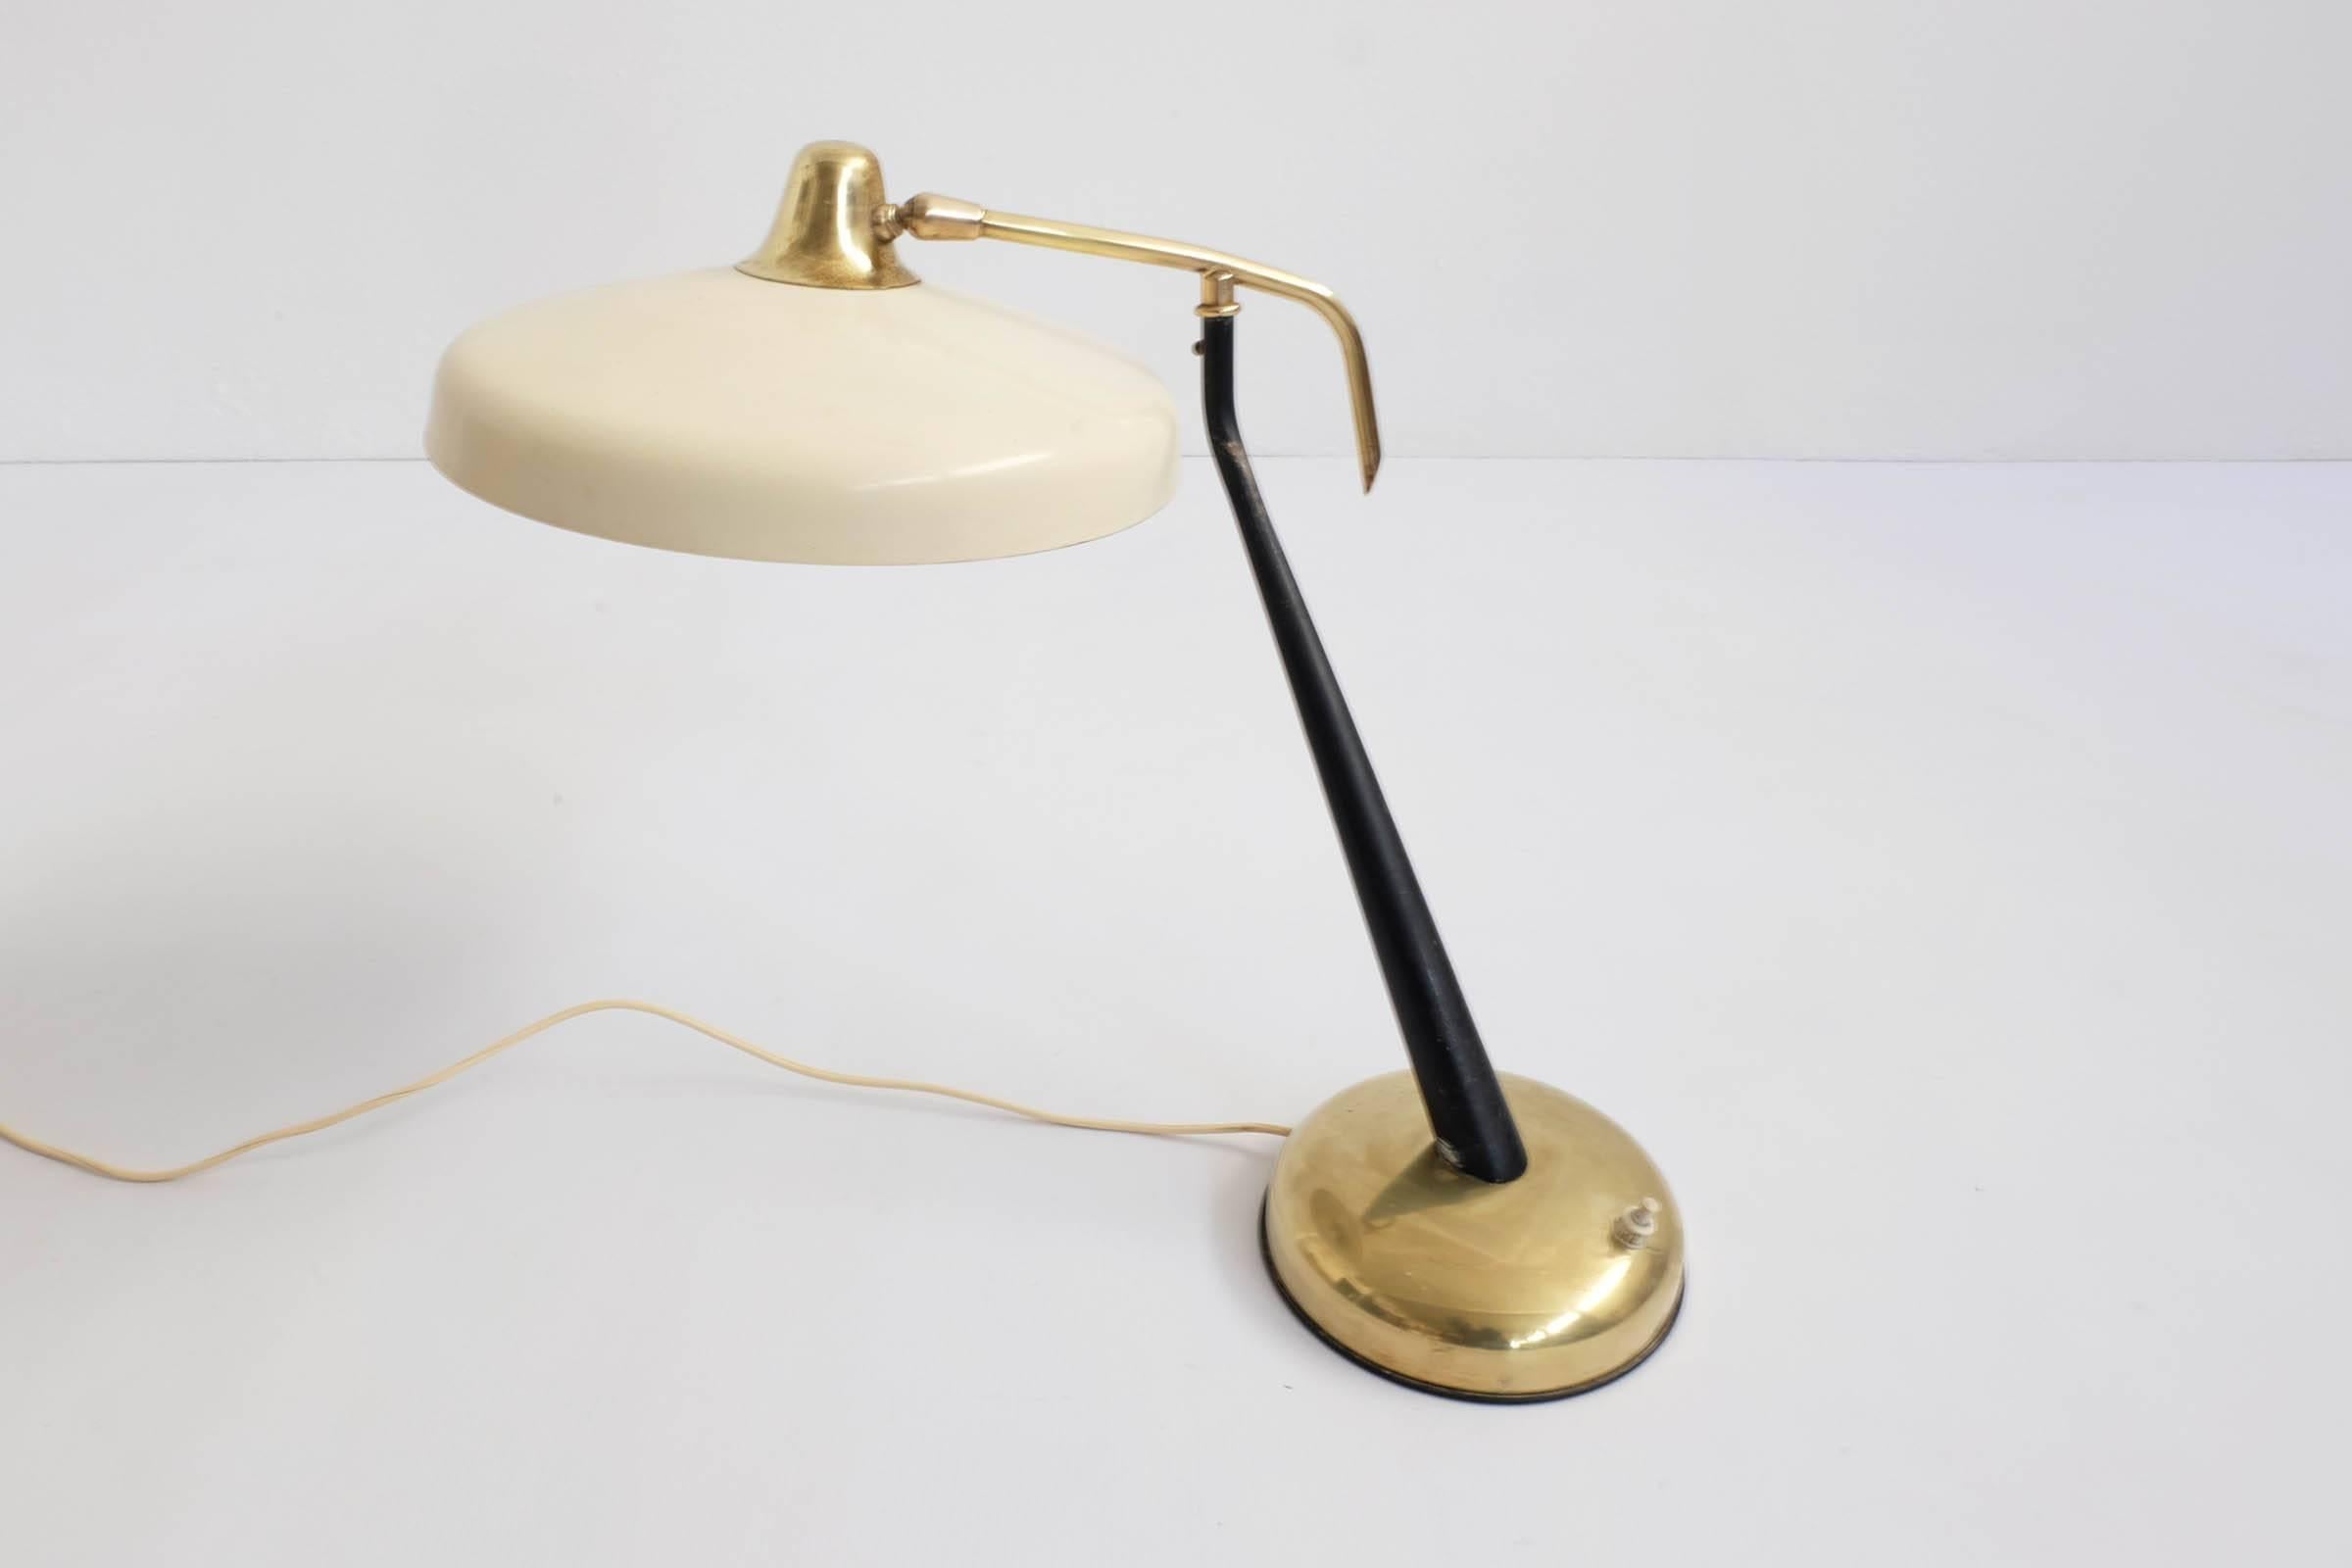 Beautiful adjustable table lamp totally revolving on the base.